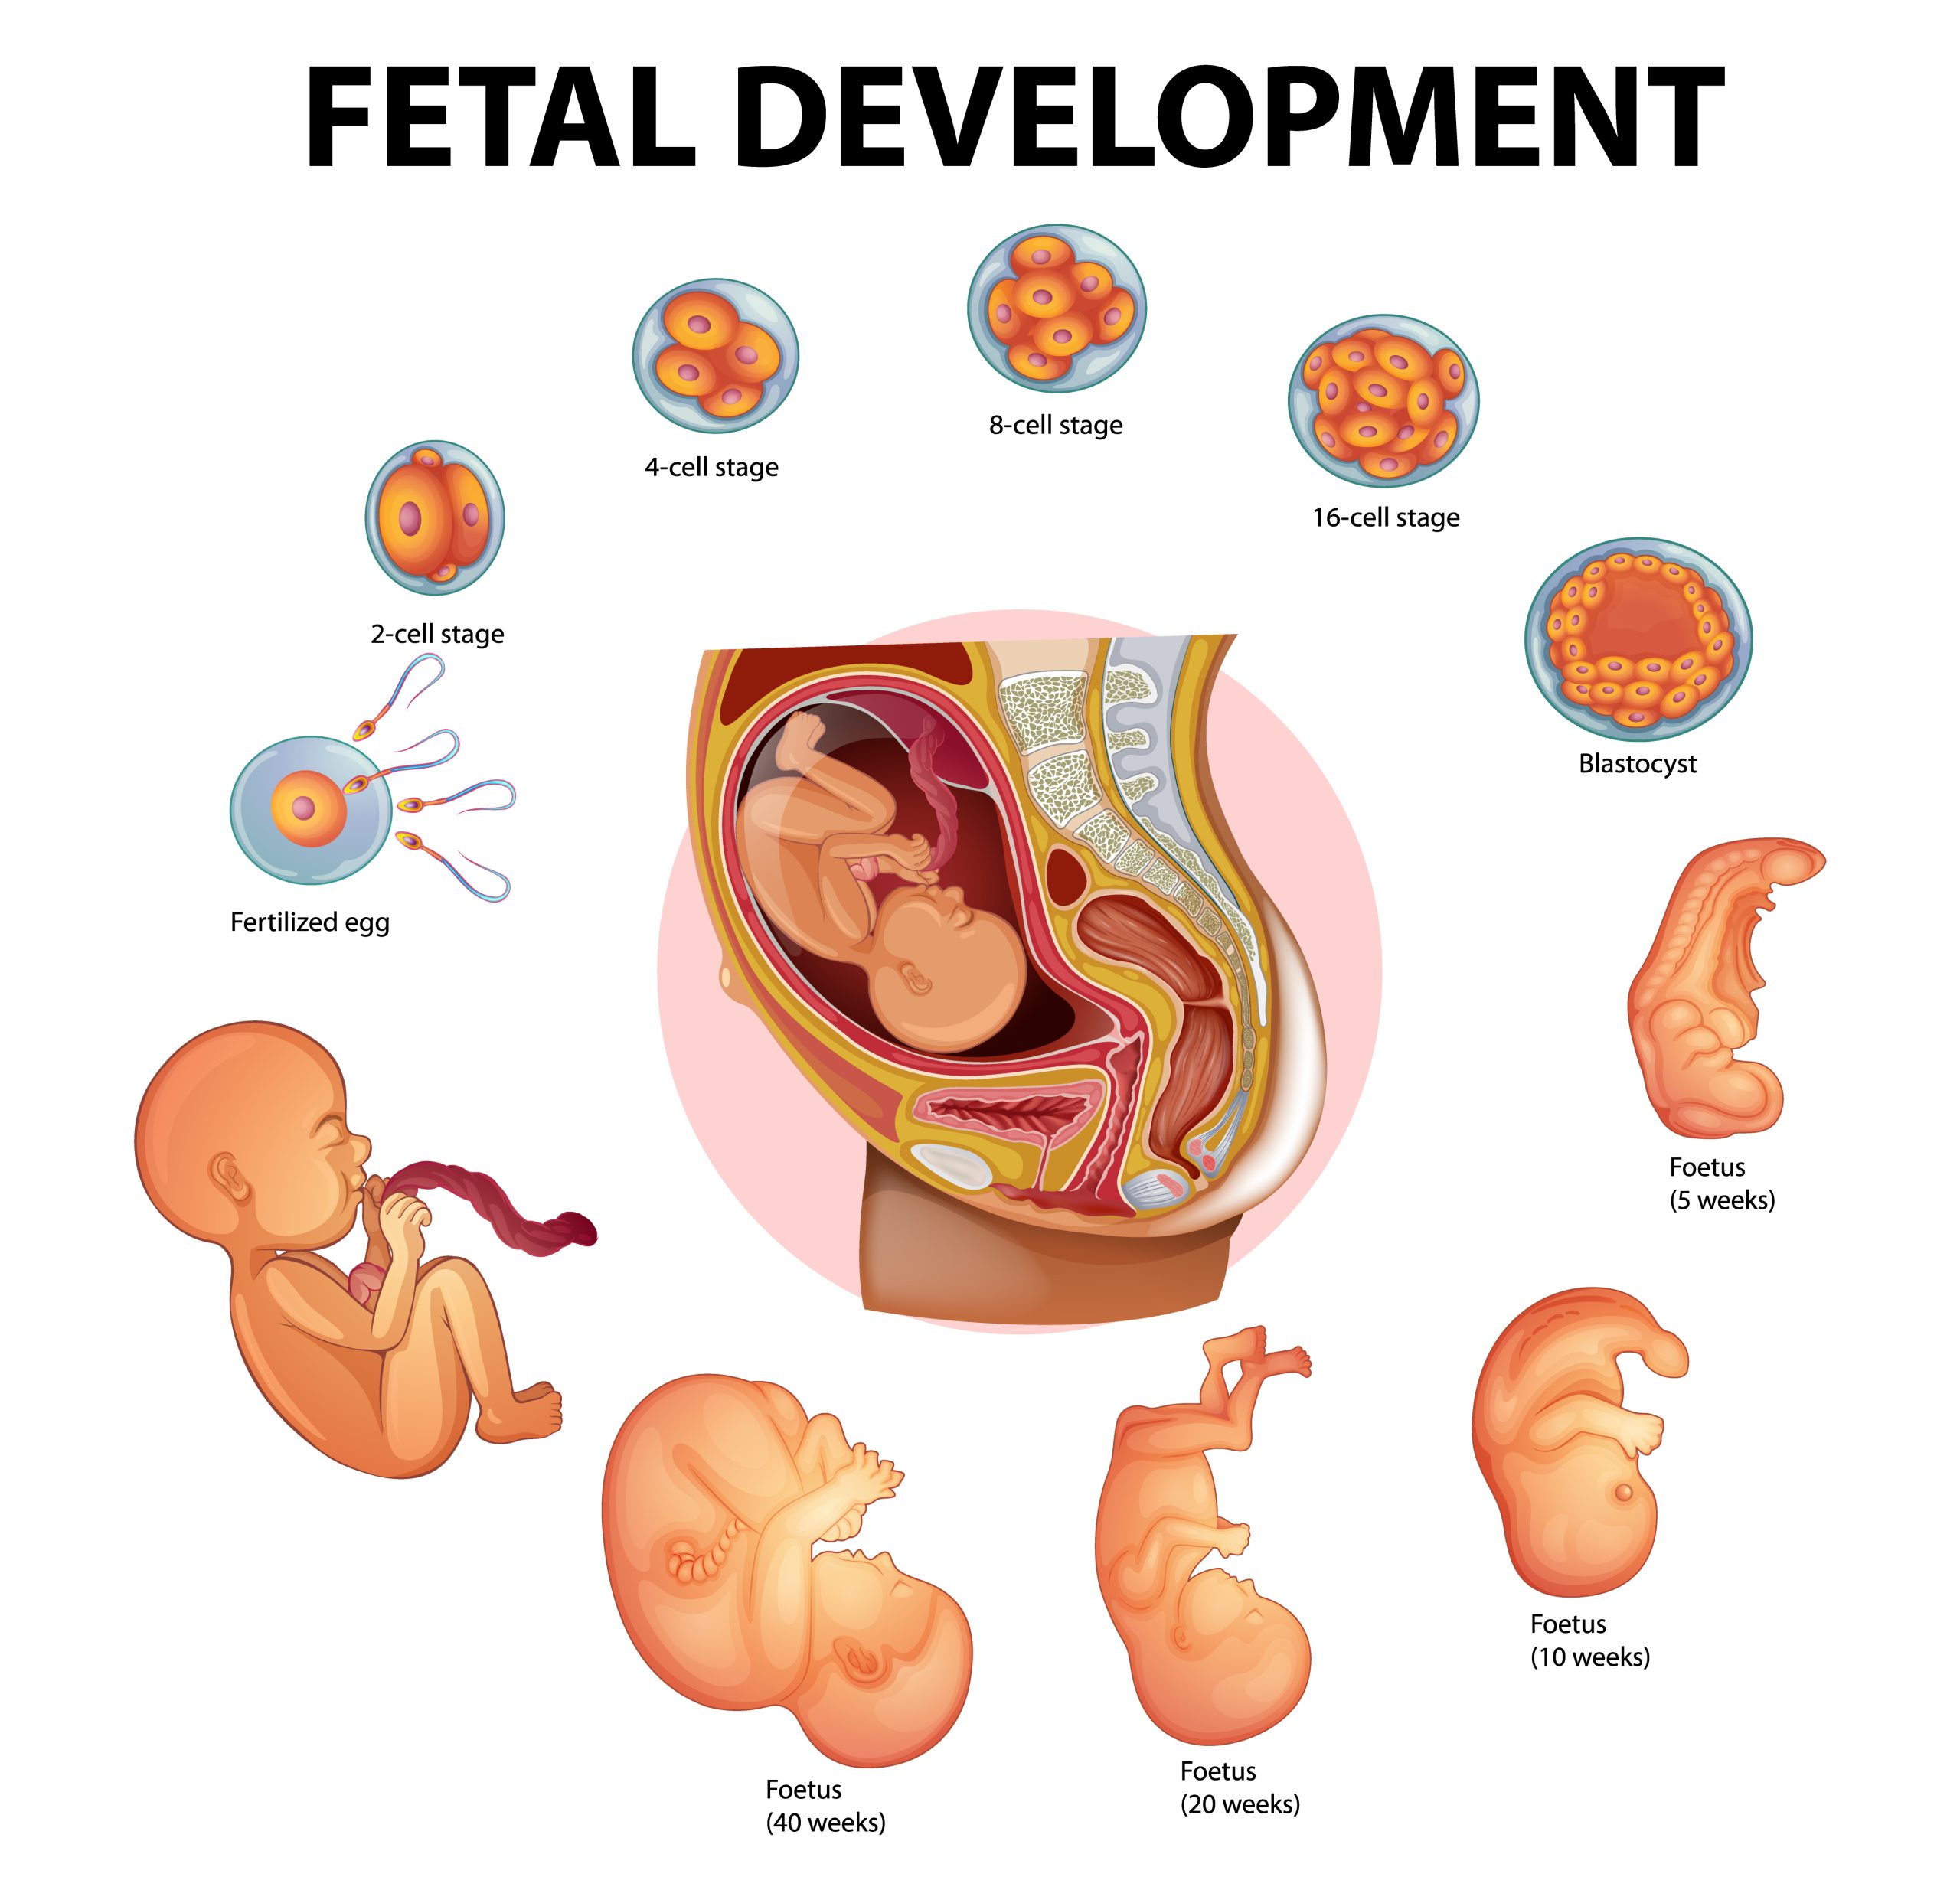 From a single cell to a fully formed human being, the journey of fetal development is truly amazing.